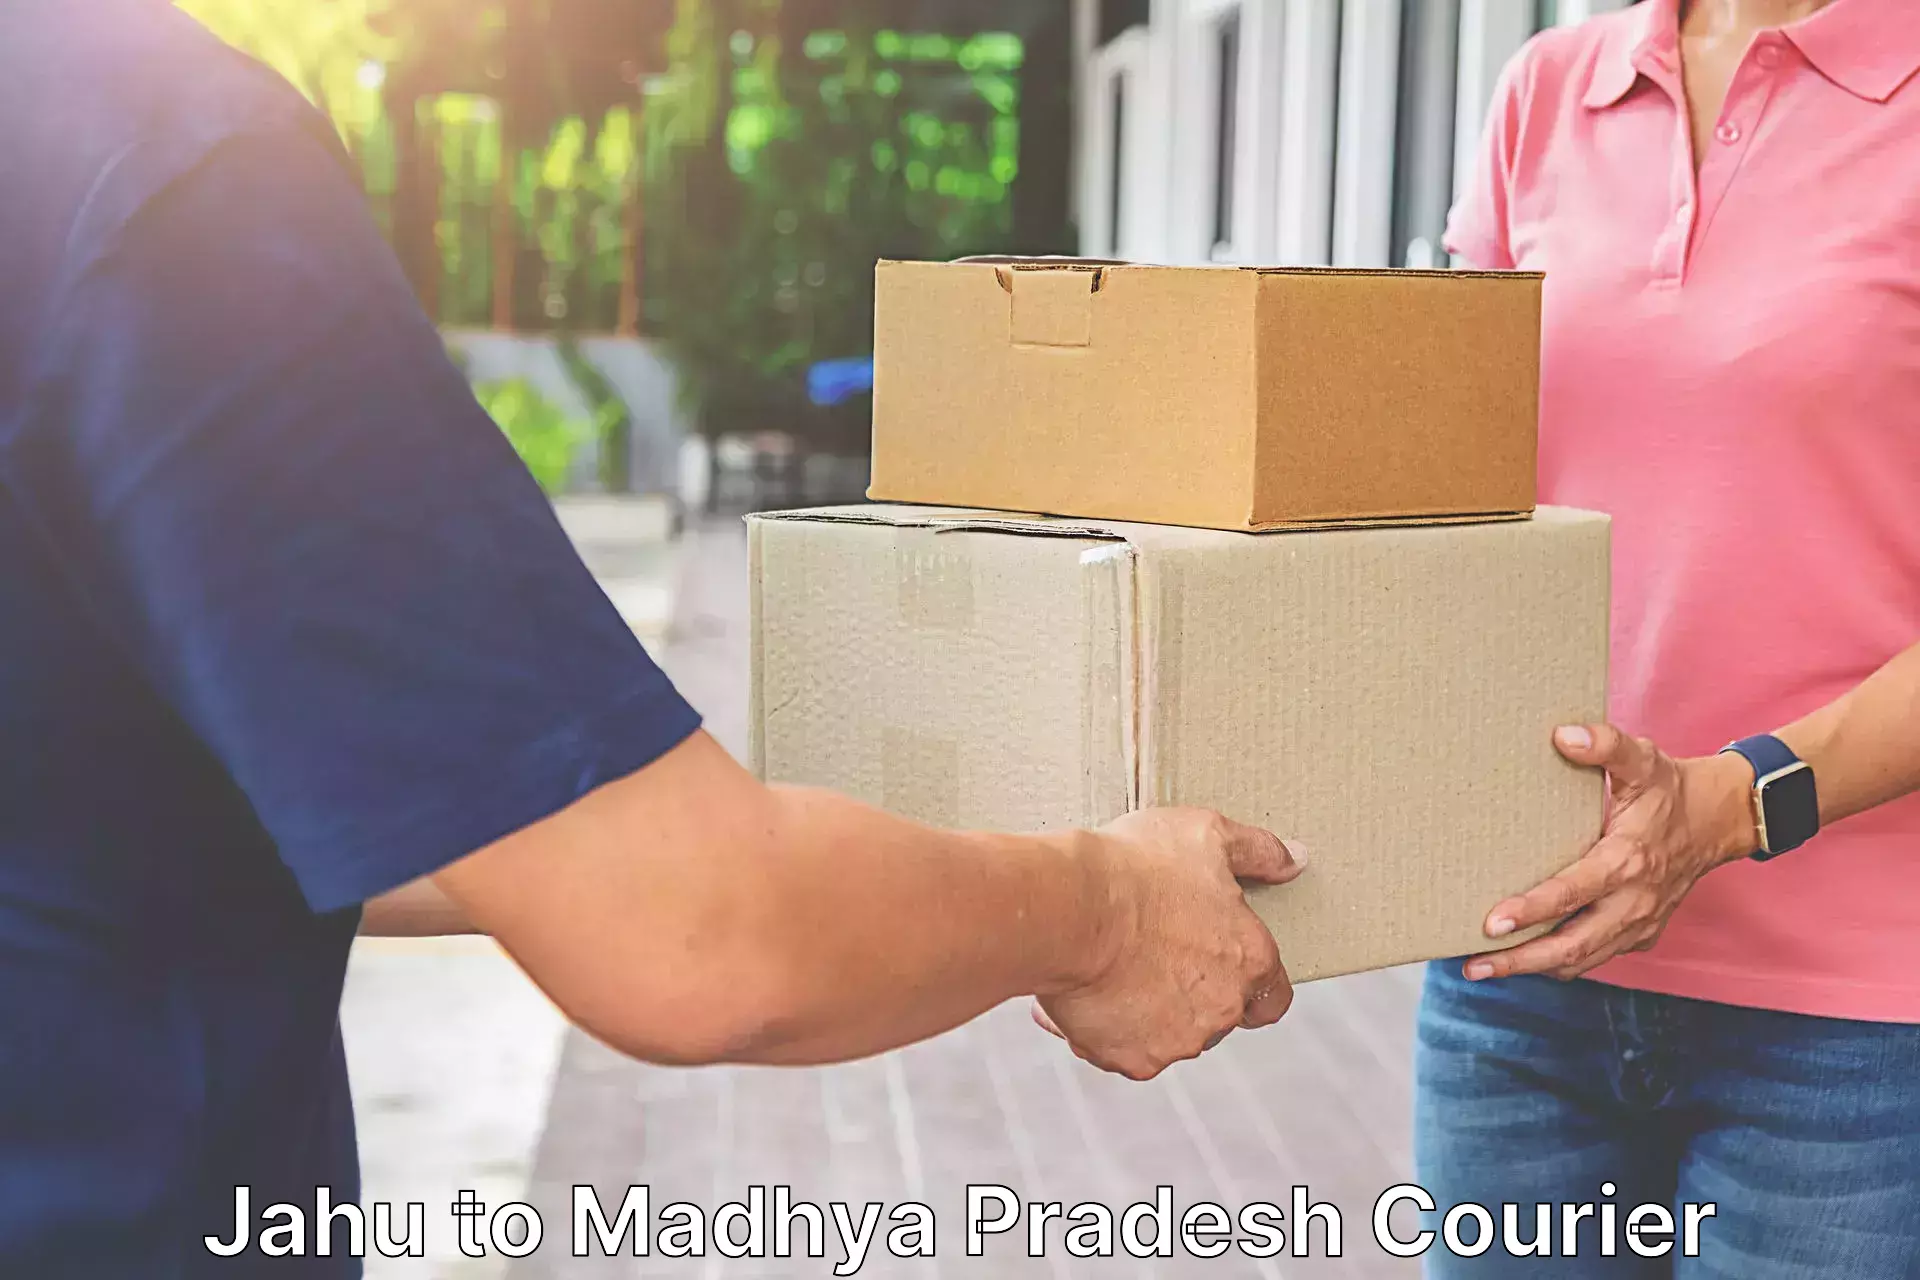 Sustainable delivery practices Jahu to Madhya Pradesh